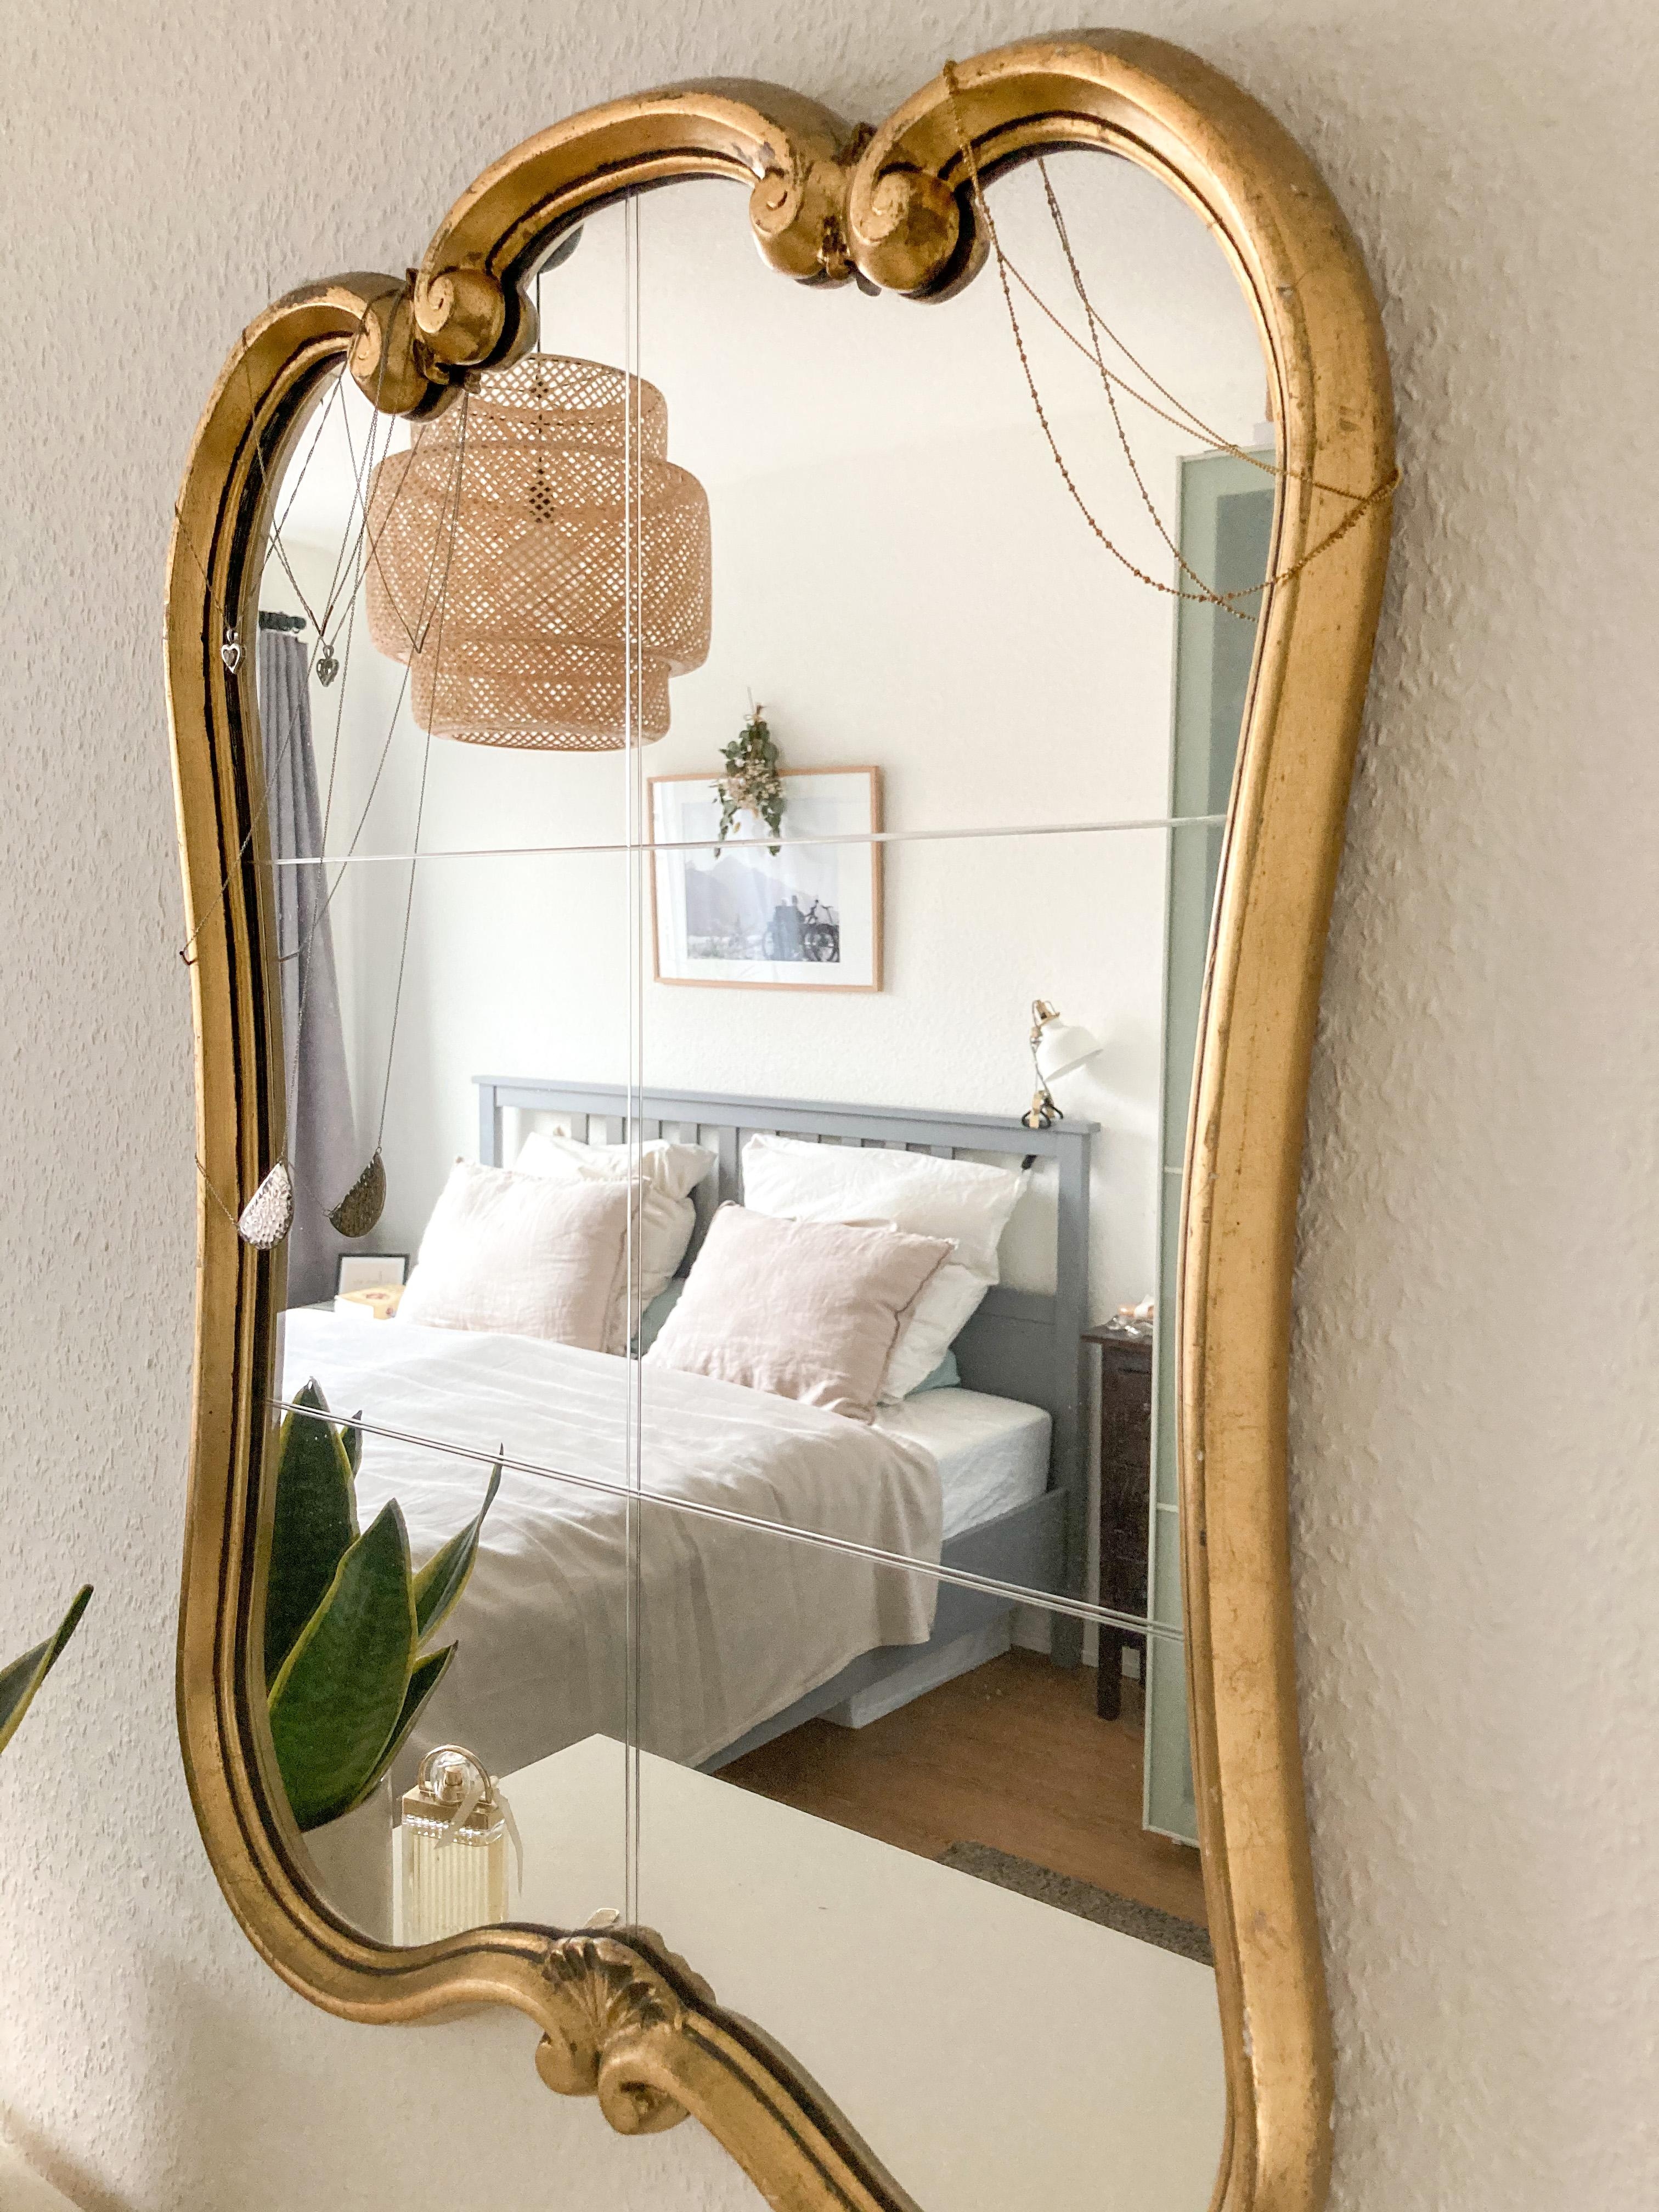 Mirror mirror on the wall..
Not in mood for #HO at all! 
Zurück ins Bett :-) 
#bedroom #schlafzimmer 